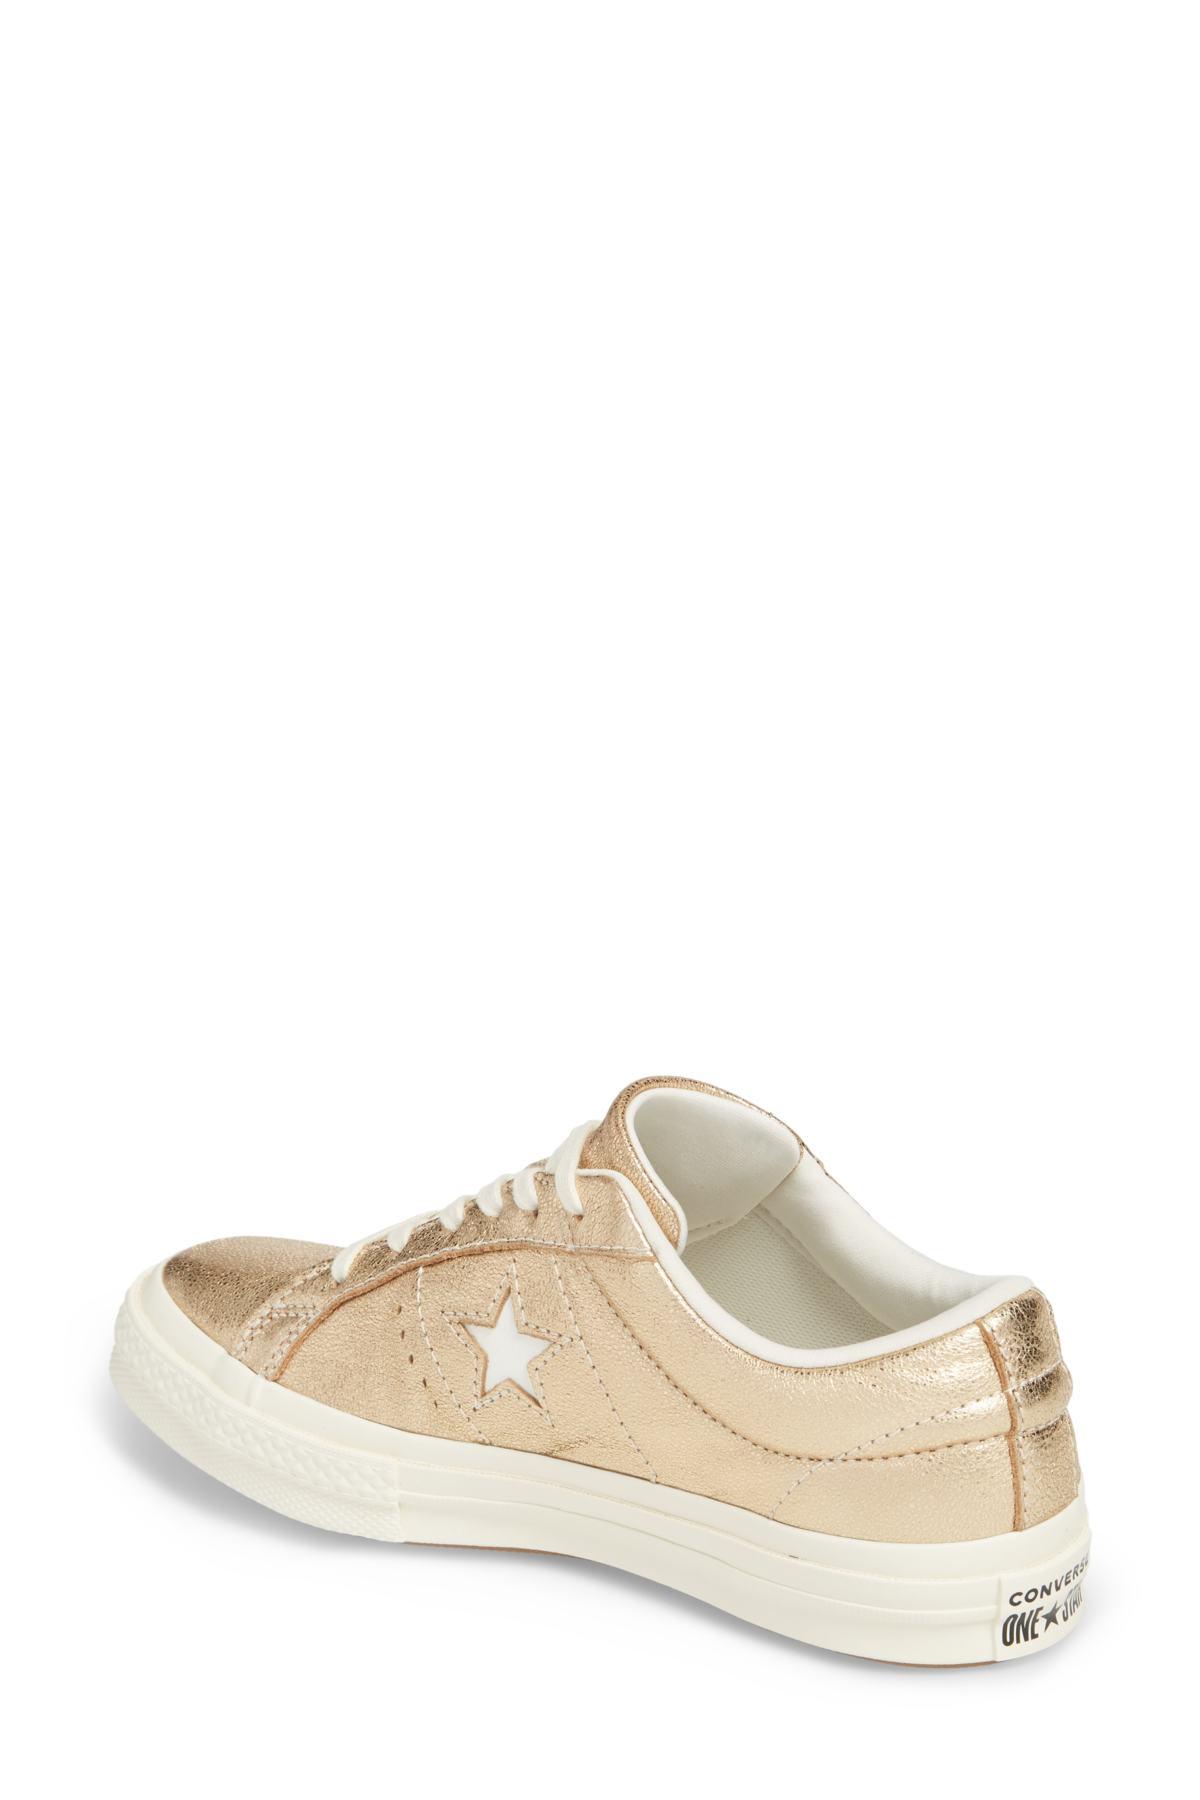 Converse Leather One Star Ox Women's 